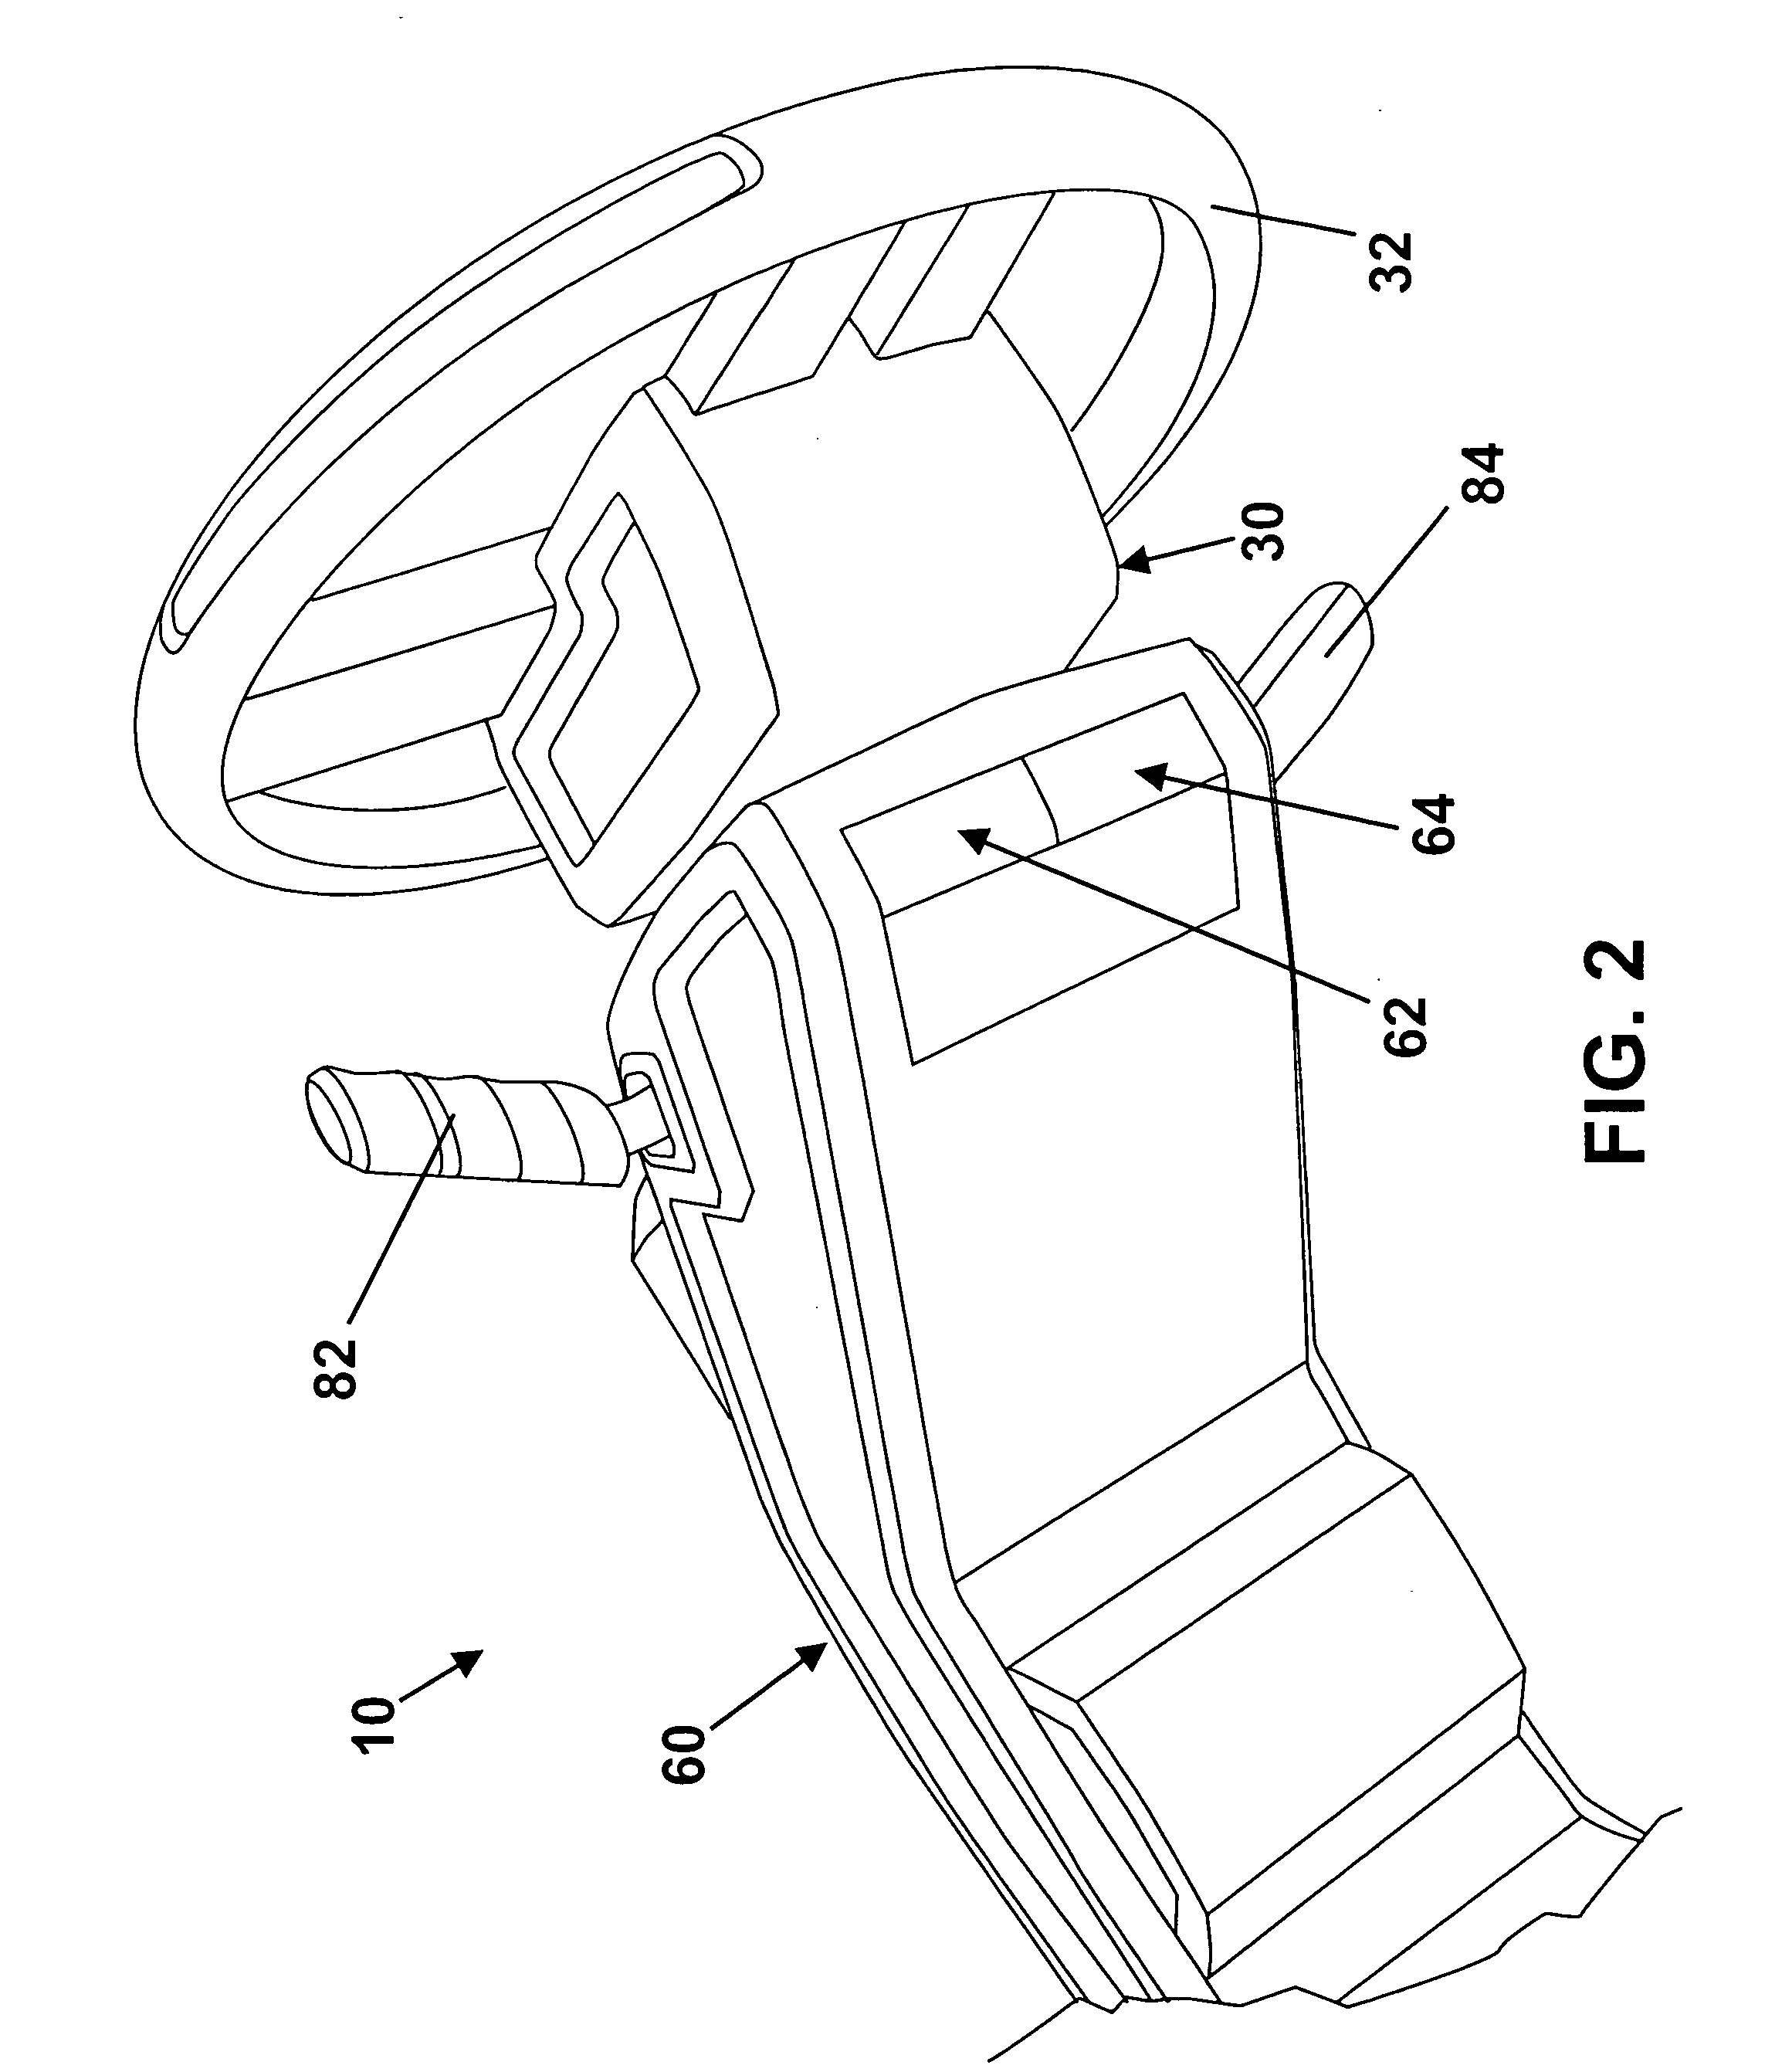 Re-positionable vehicle control-by-wire assembly, method, and system